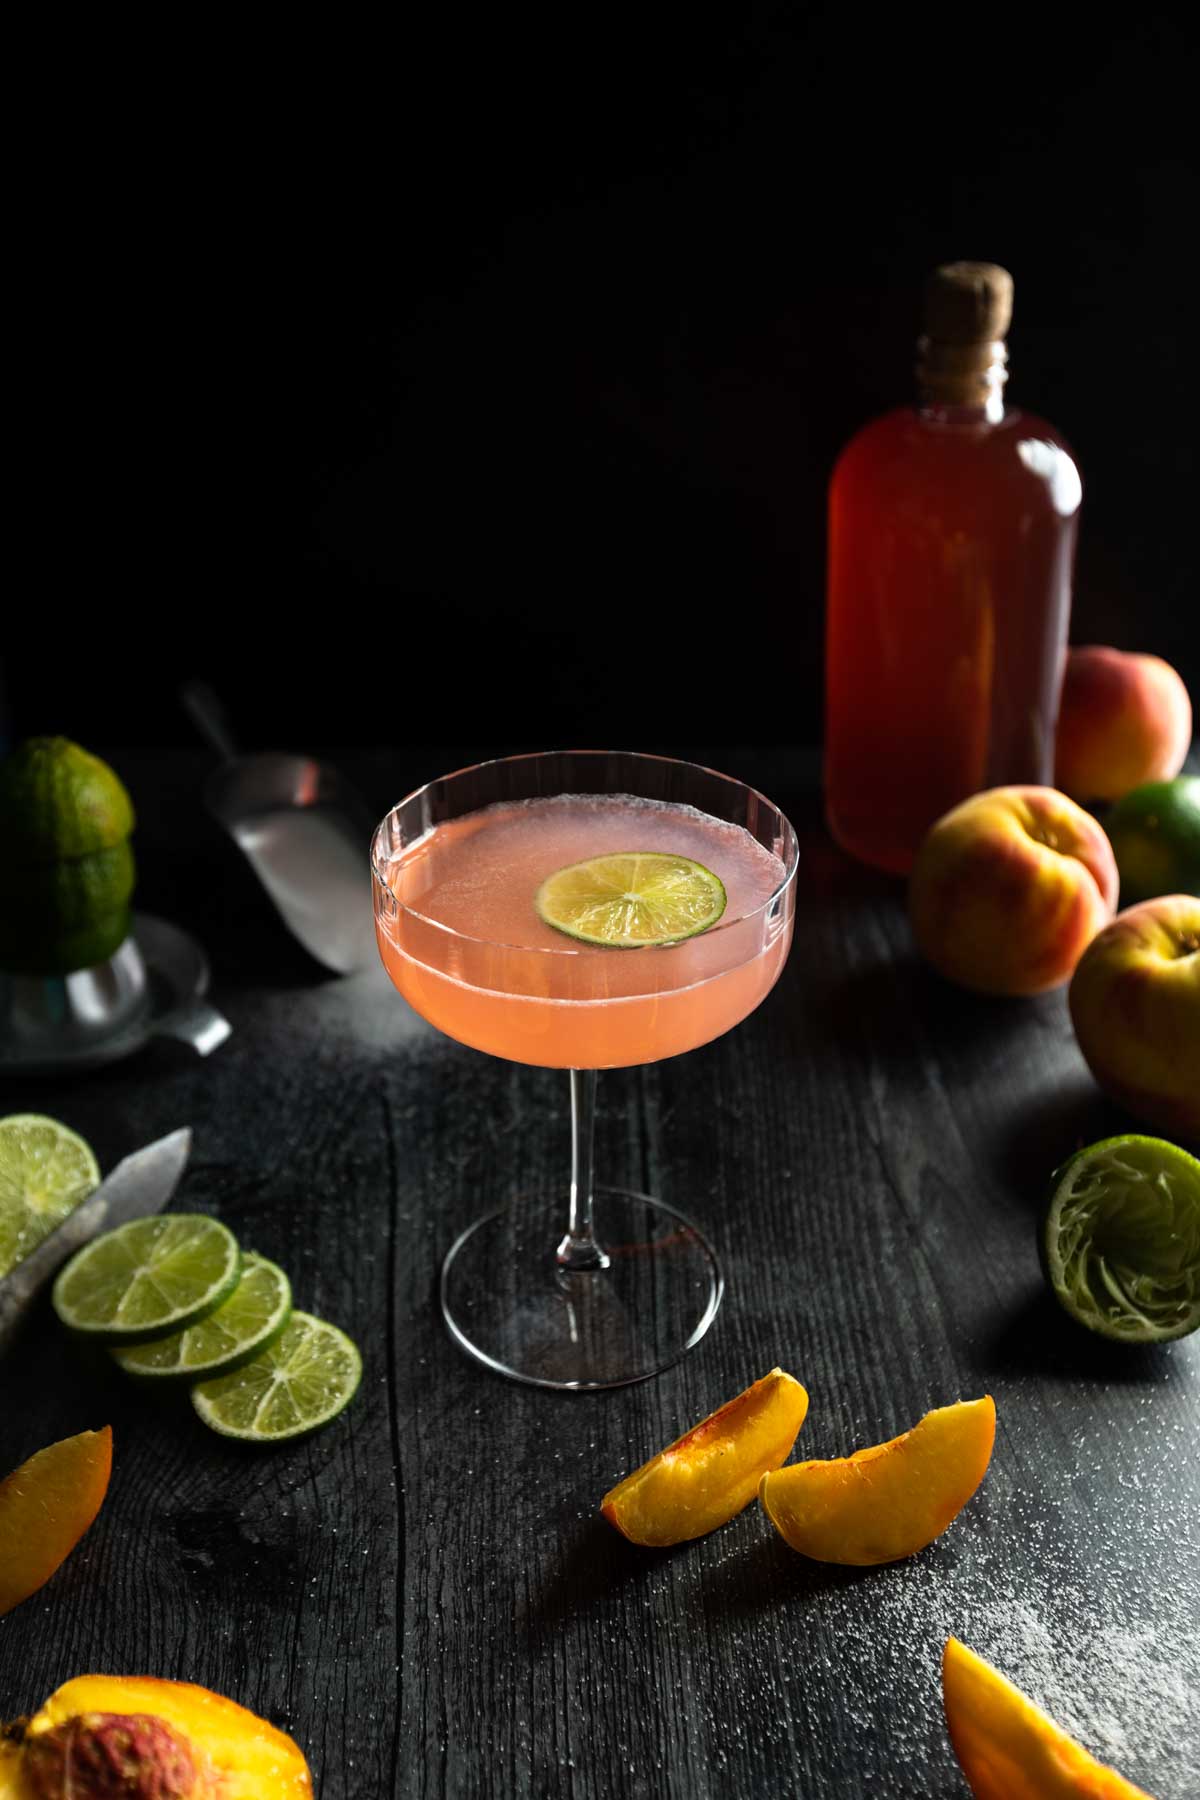 A pink peach daiquiri in a fluted coupe glass with a lime wedge garnish surrounded by slices of peaches, limes and a bottle of peach syrup